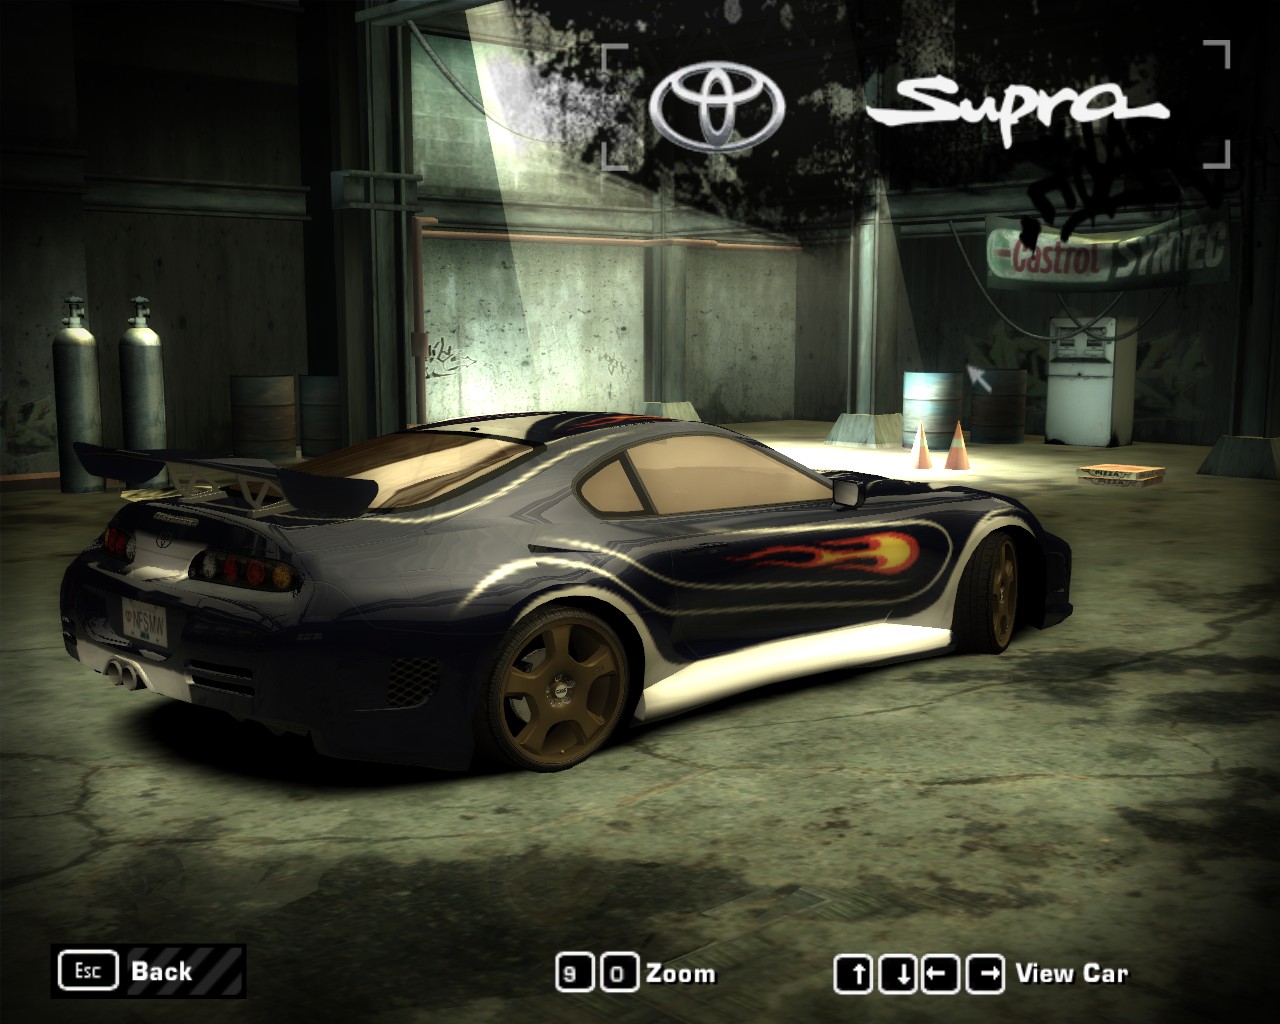 Тачка босс. Toyota Supra NFS MW 2005. Супра NFS most wanted. Диски из NFS most wanted 2005. Тойота Супра Вика из NFS most wanted.